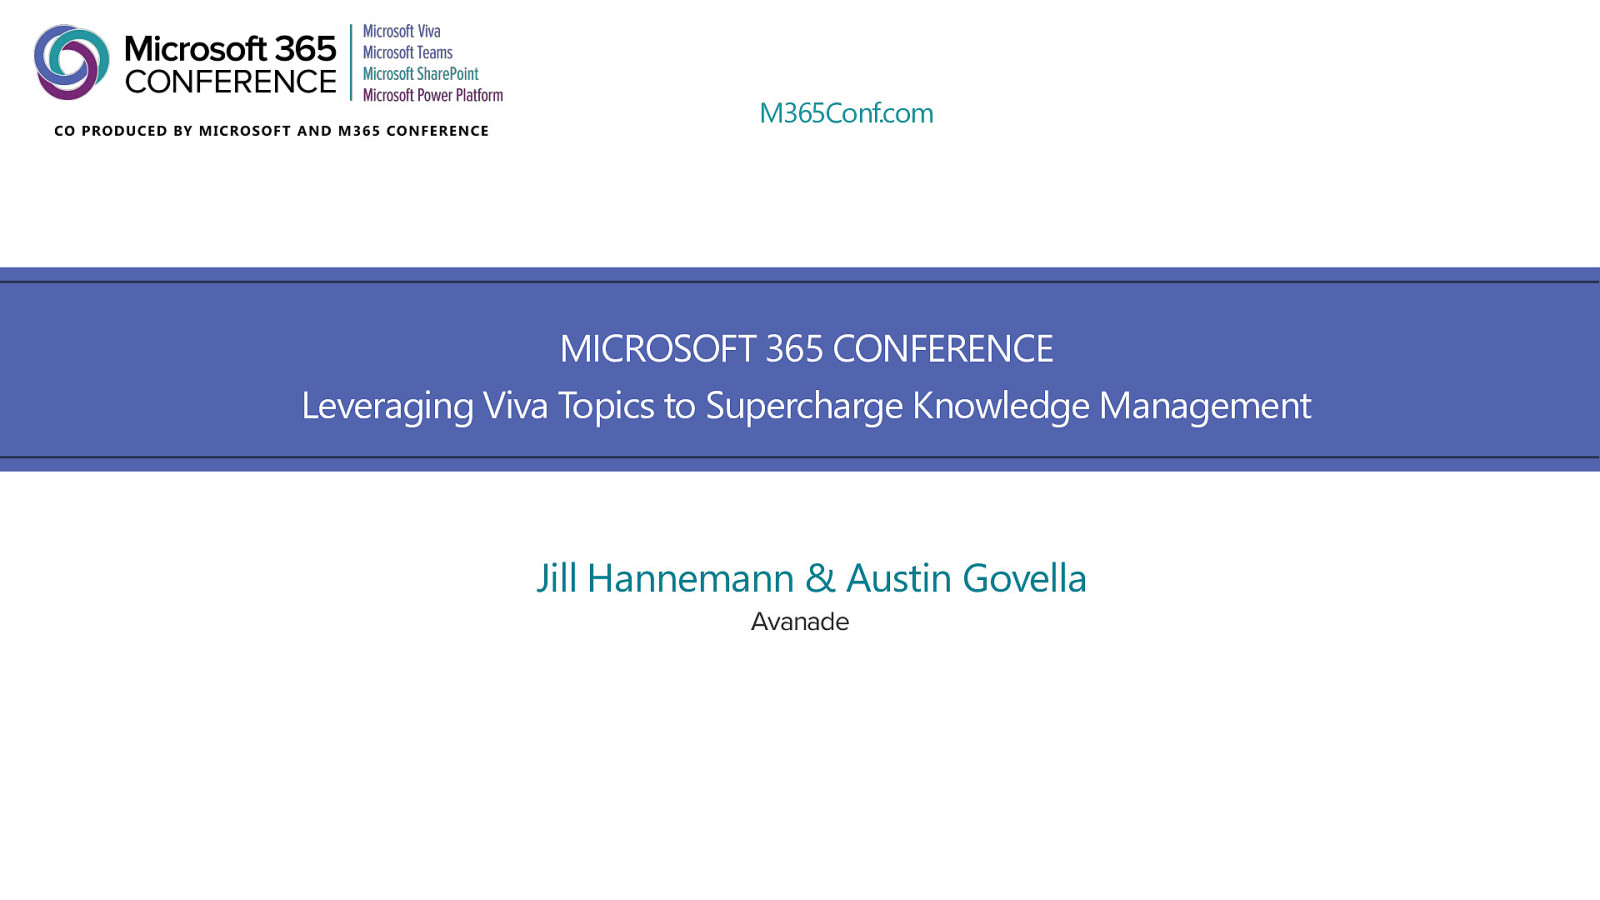 Leveraging Viva Topics To Supercharge Your Knowledge Management by Austin Govella